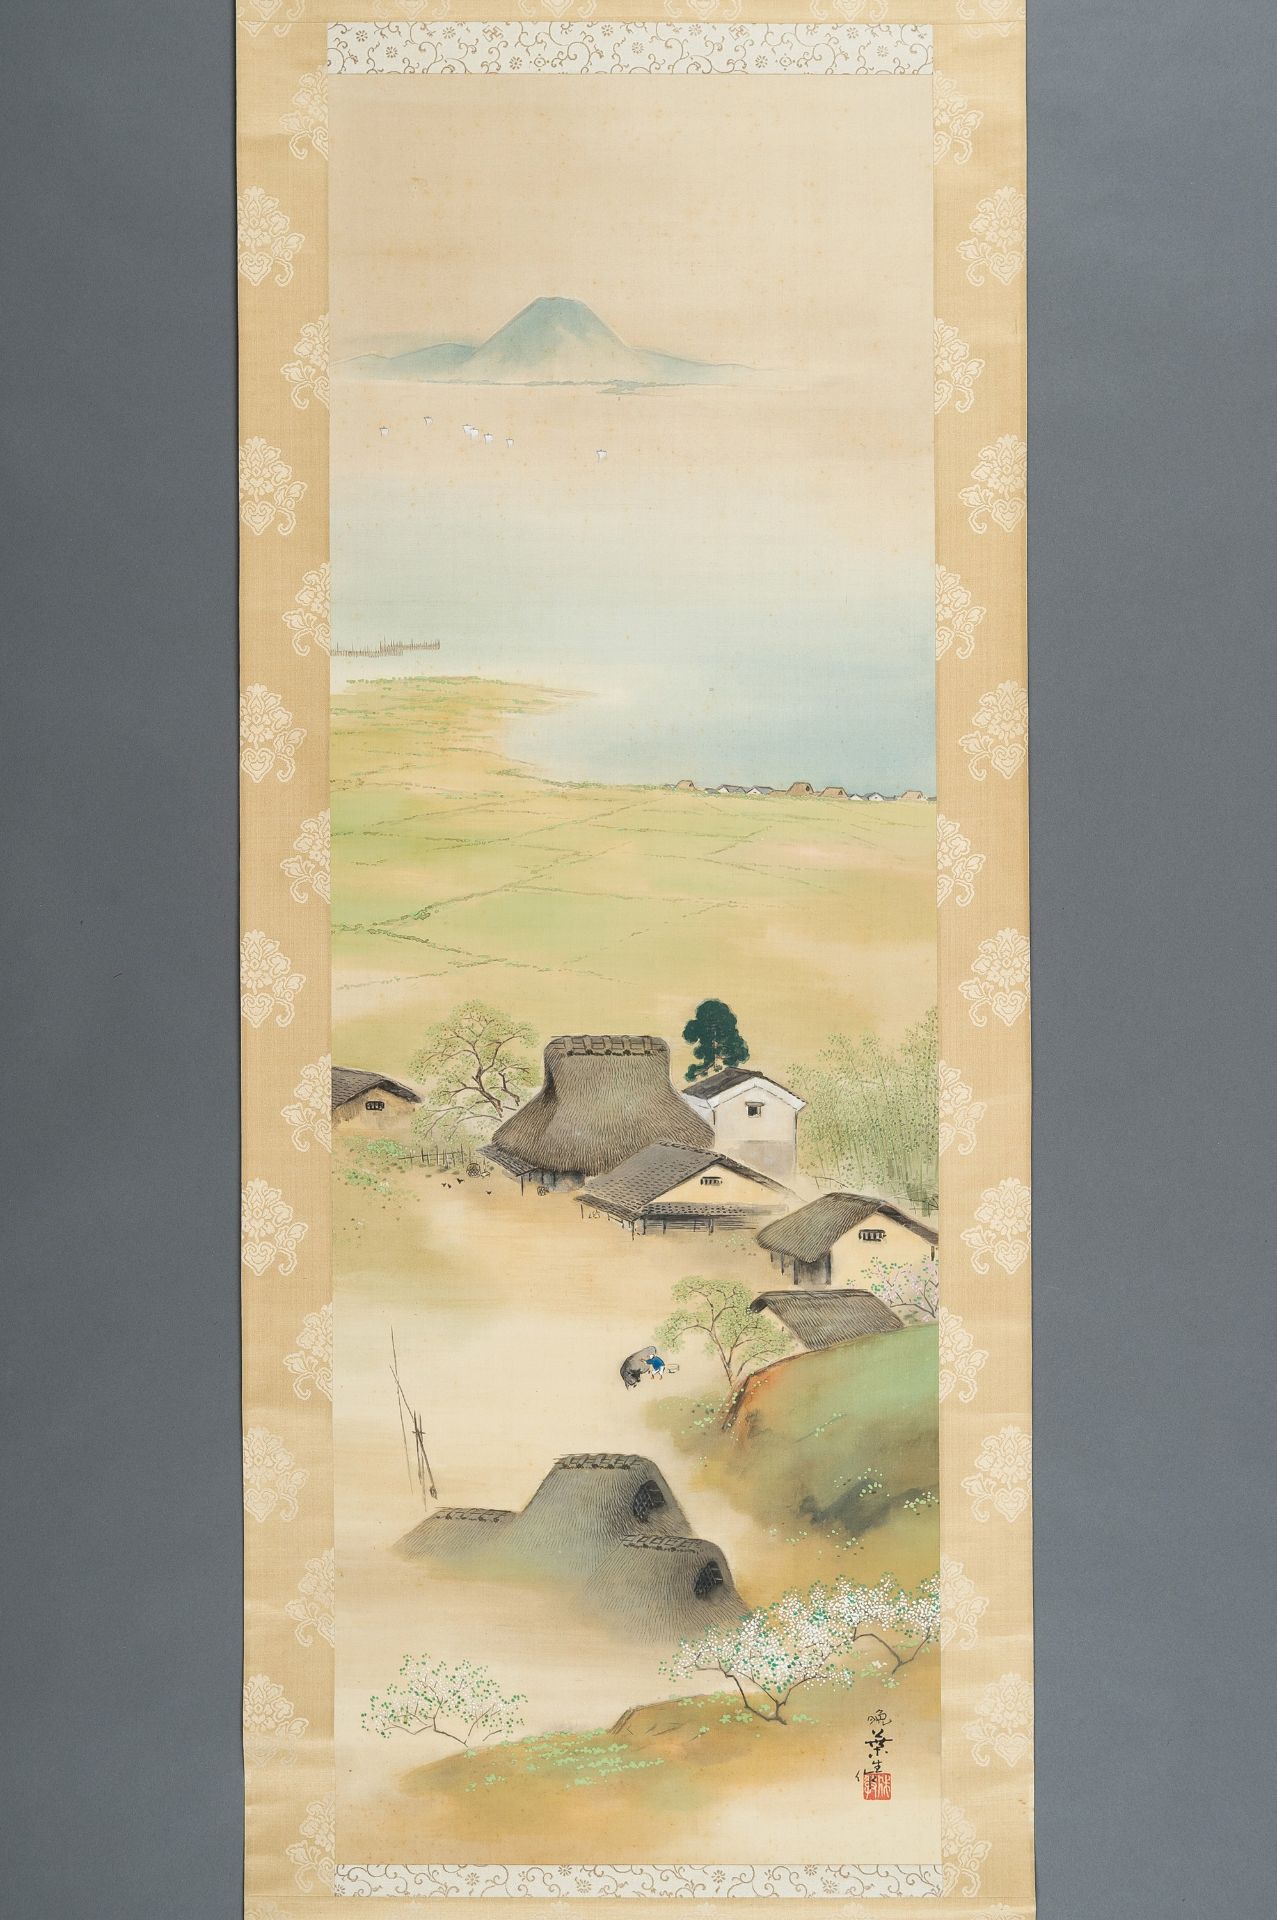 A SCROLL PAINTING DEPICTING A FARMER'S VILLAGE AND MOUNT FUJI - Image 7 of 12